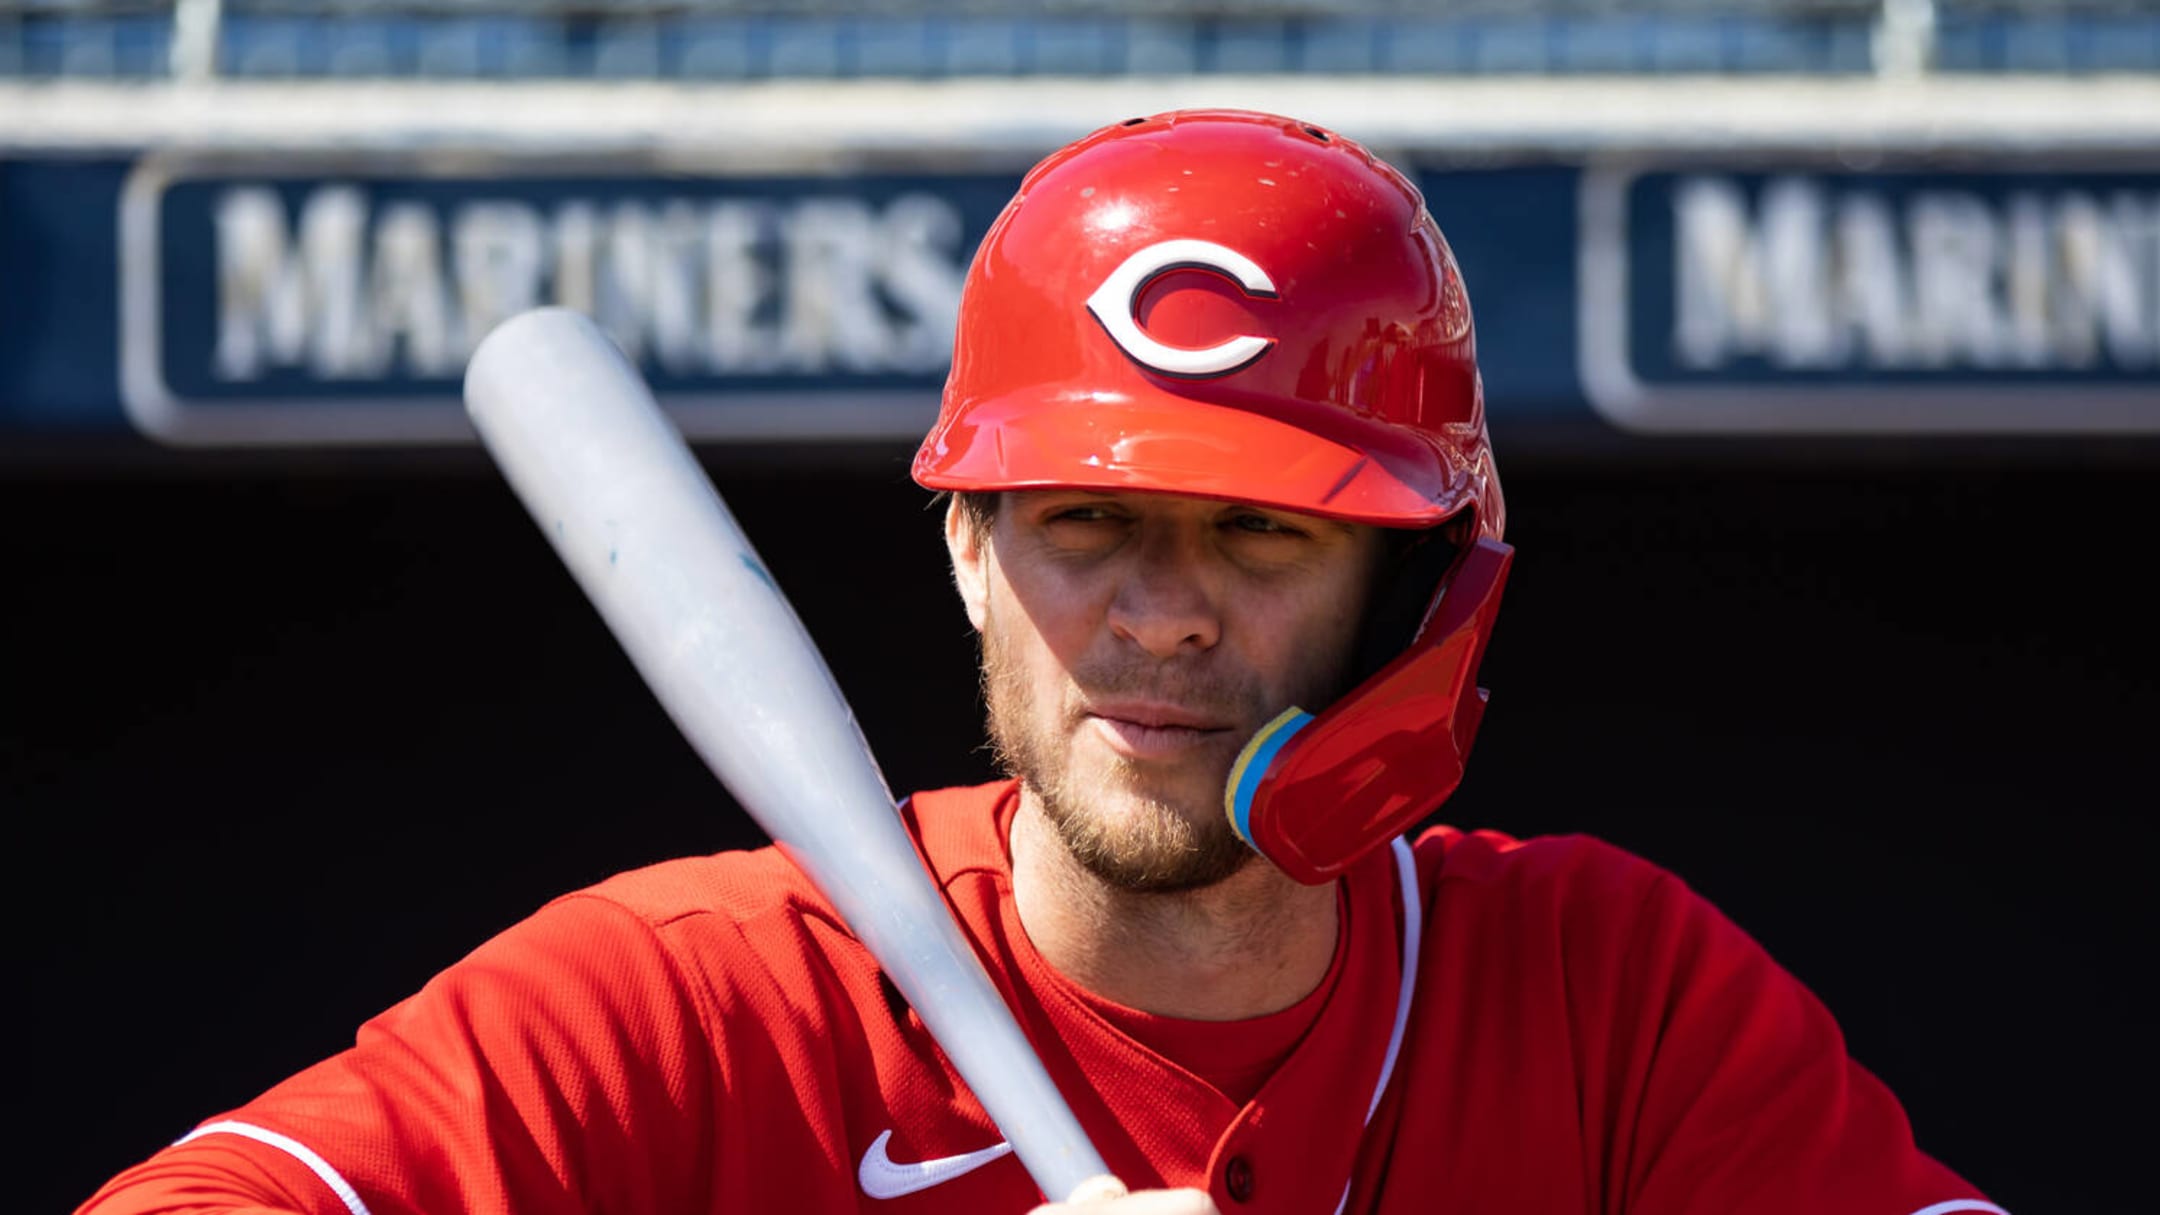 Cincinnati Reds: 3 players most likely to bounce back in 2021